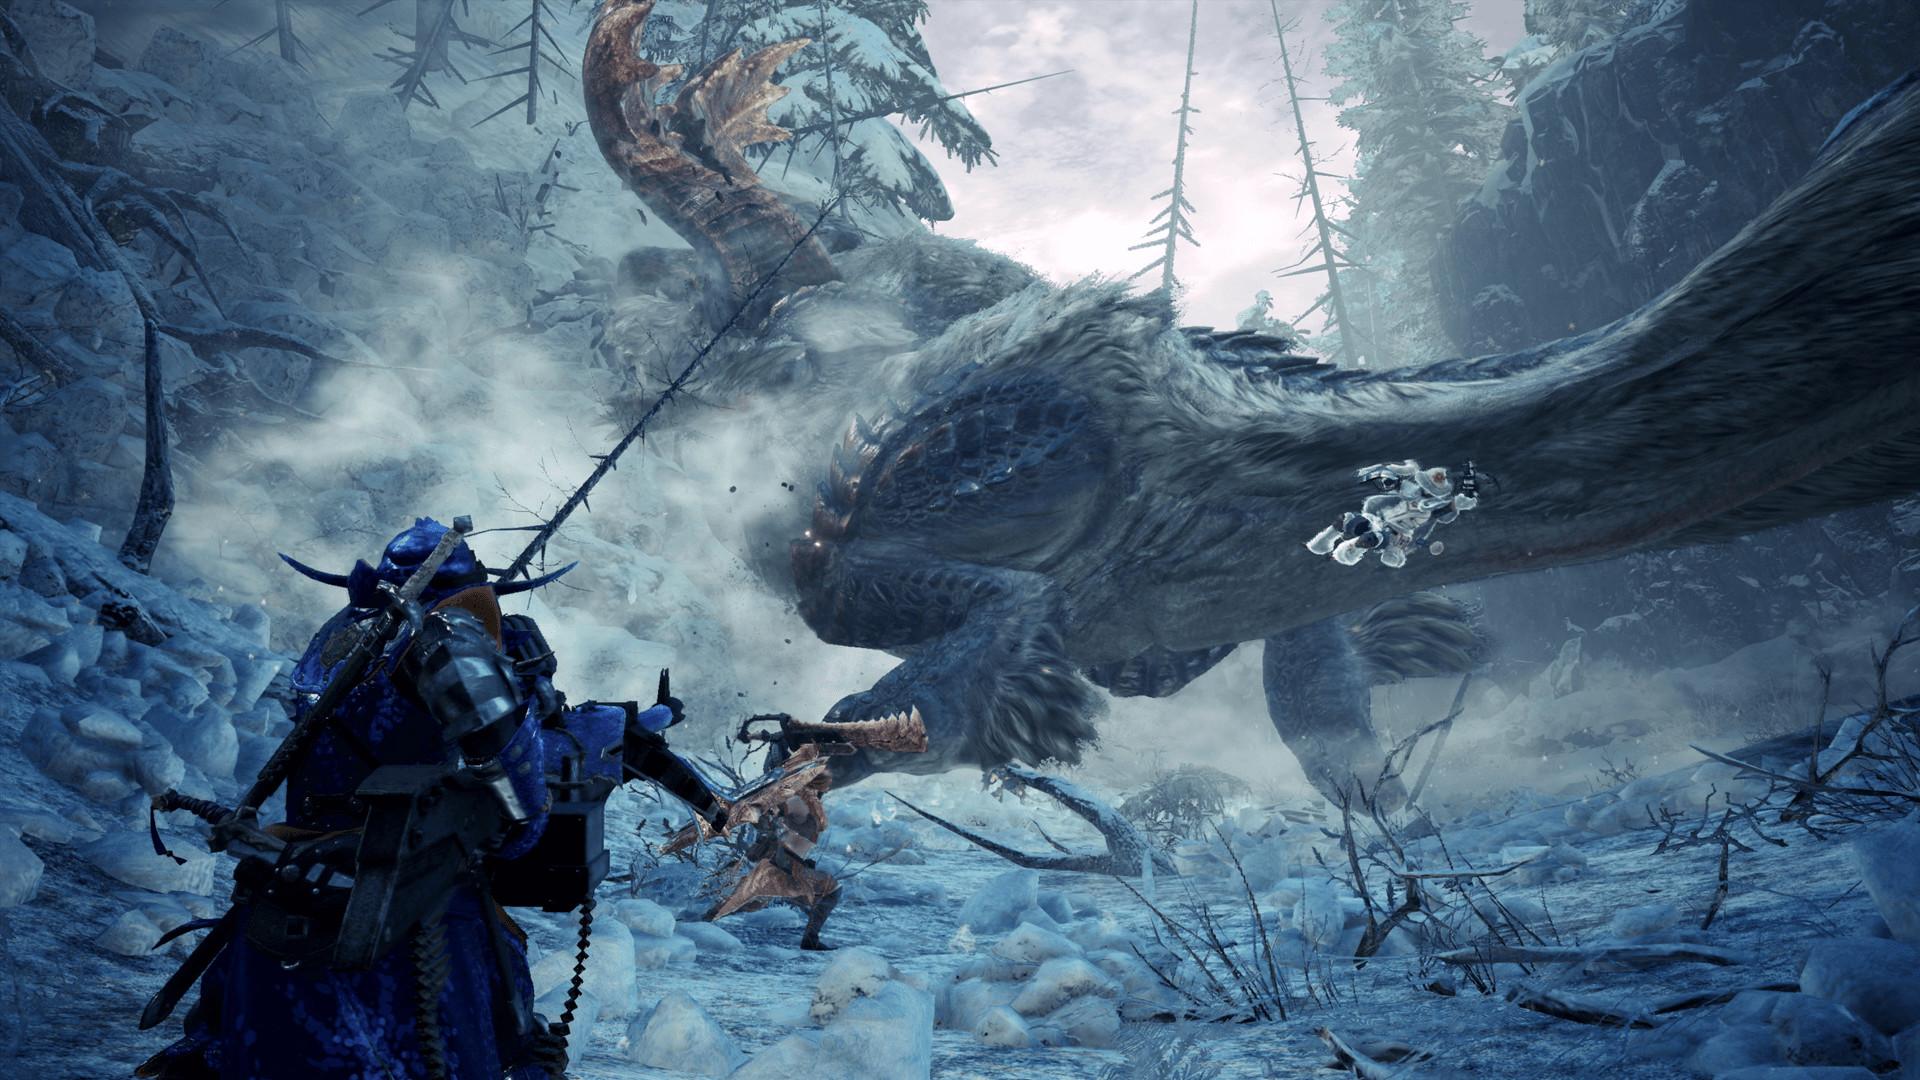 Monster Hunter World: Iceborne trailer hints at a powerful